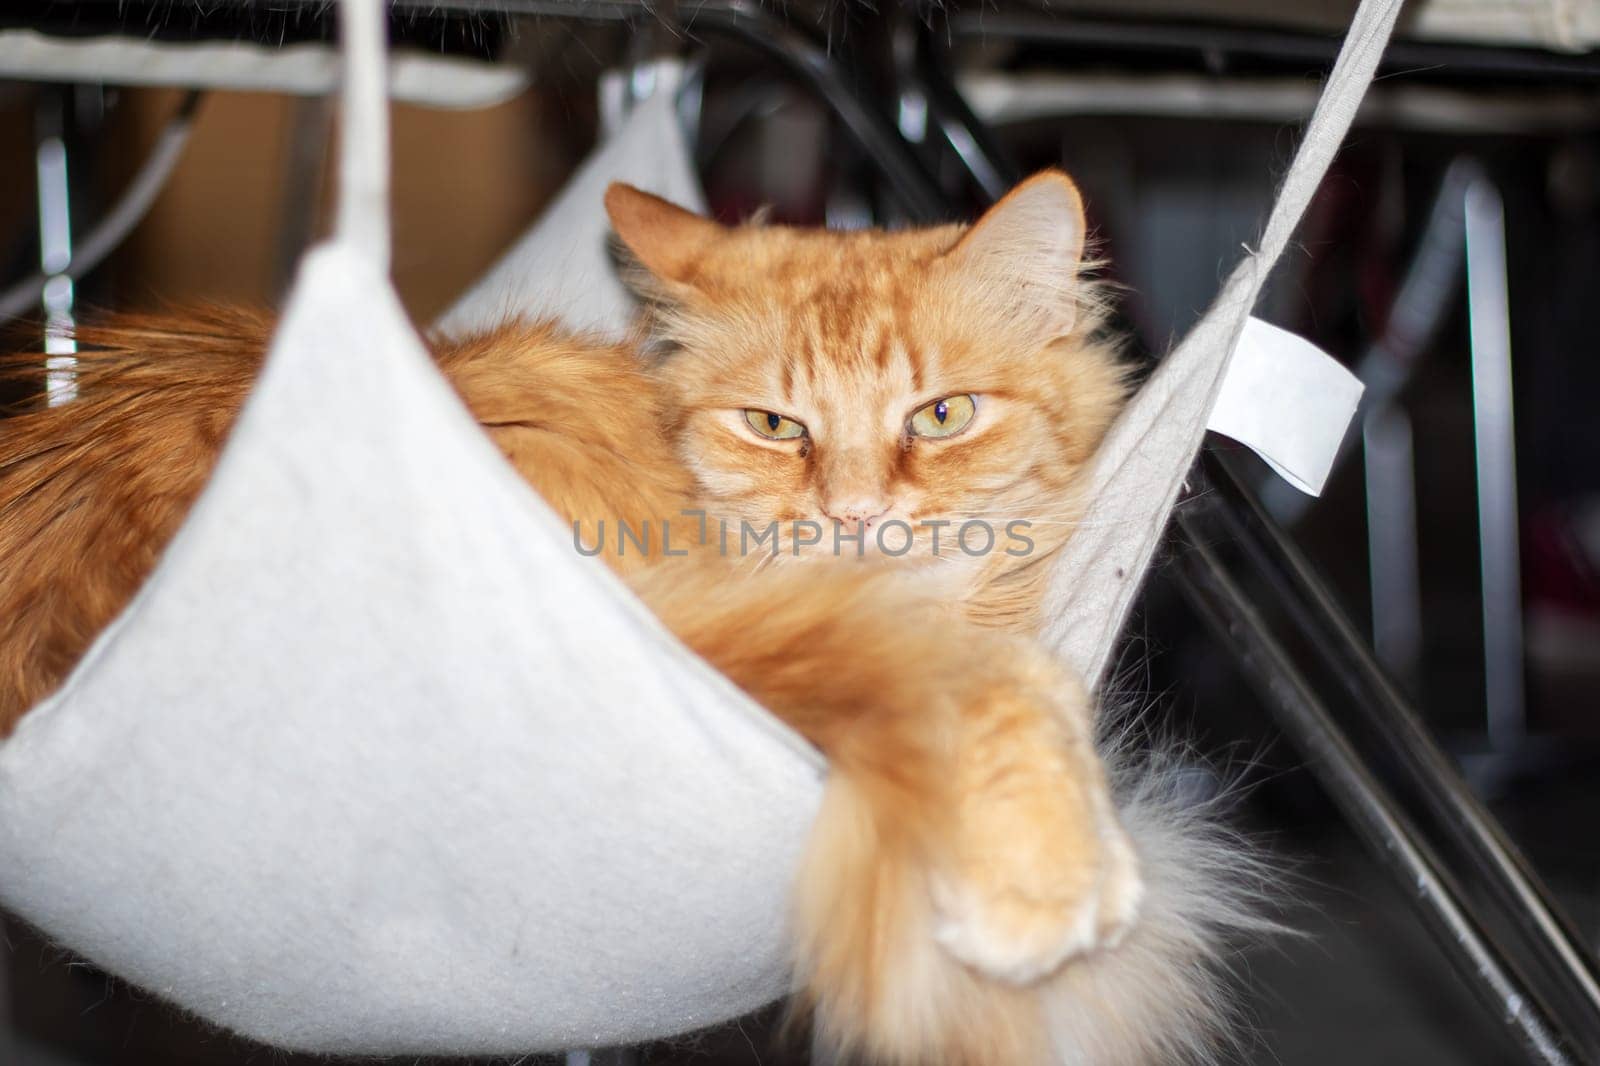 A domestic shorthaired orange cat with whiskers and fur is lounging in a white hammock. This carnivore from the Felidae family has a fawn tail and sharp claws